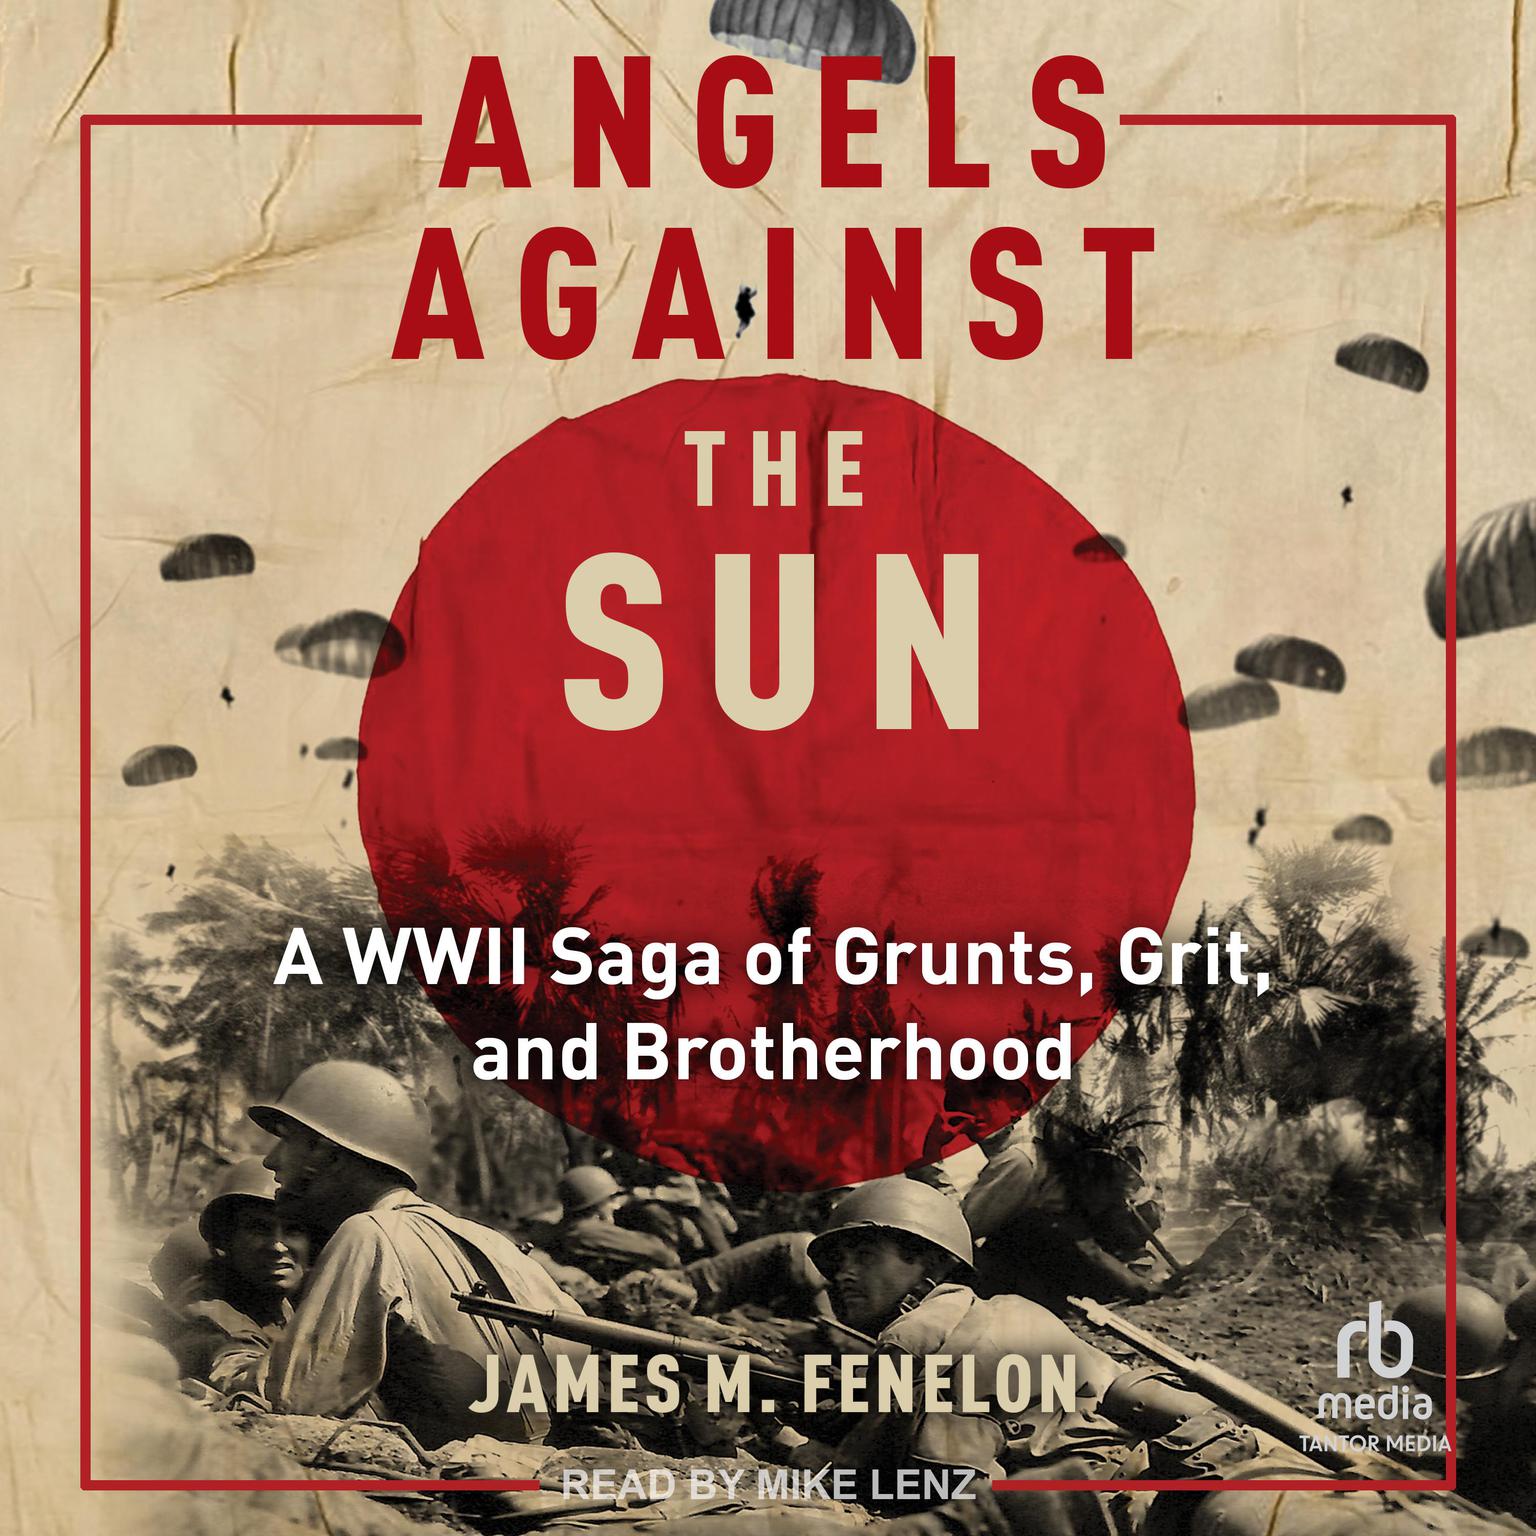 Angels Against the Sun: A WWIl Saga of Grunts, Grit, and Brotherhood Audiobook, by James M. Fenelon